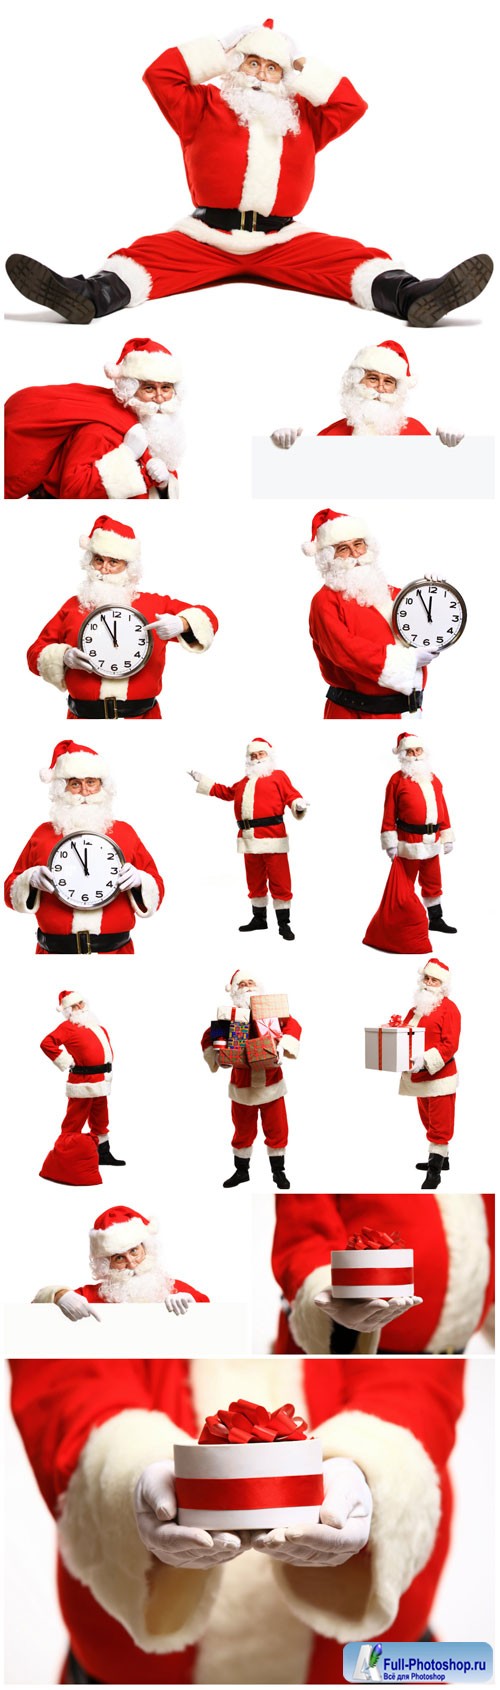 New Year and Christmas stock photos 14